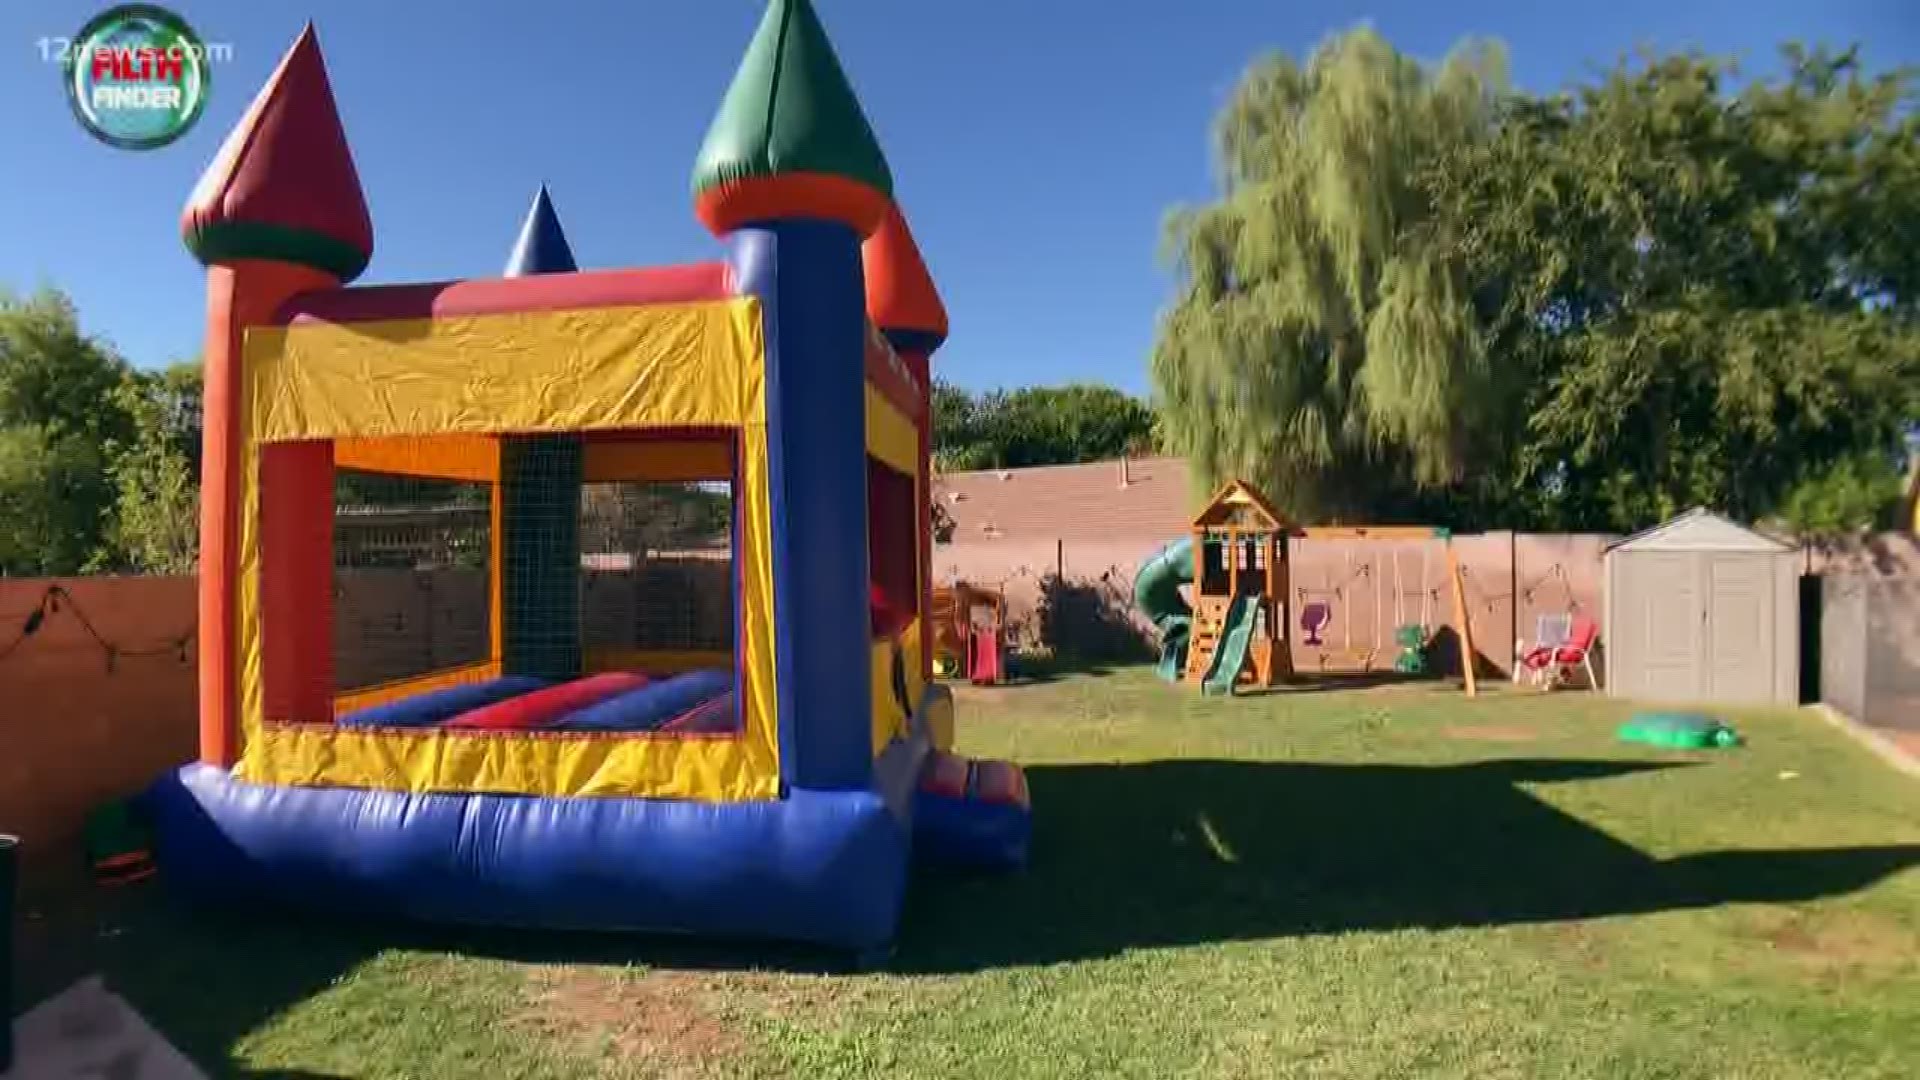 Early we showed you how dirty a bounce house can get when a small group of kids is jumping in one. Now, we show you just how many germs are lurking when lots of kids get to jumping.